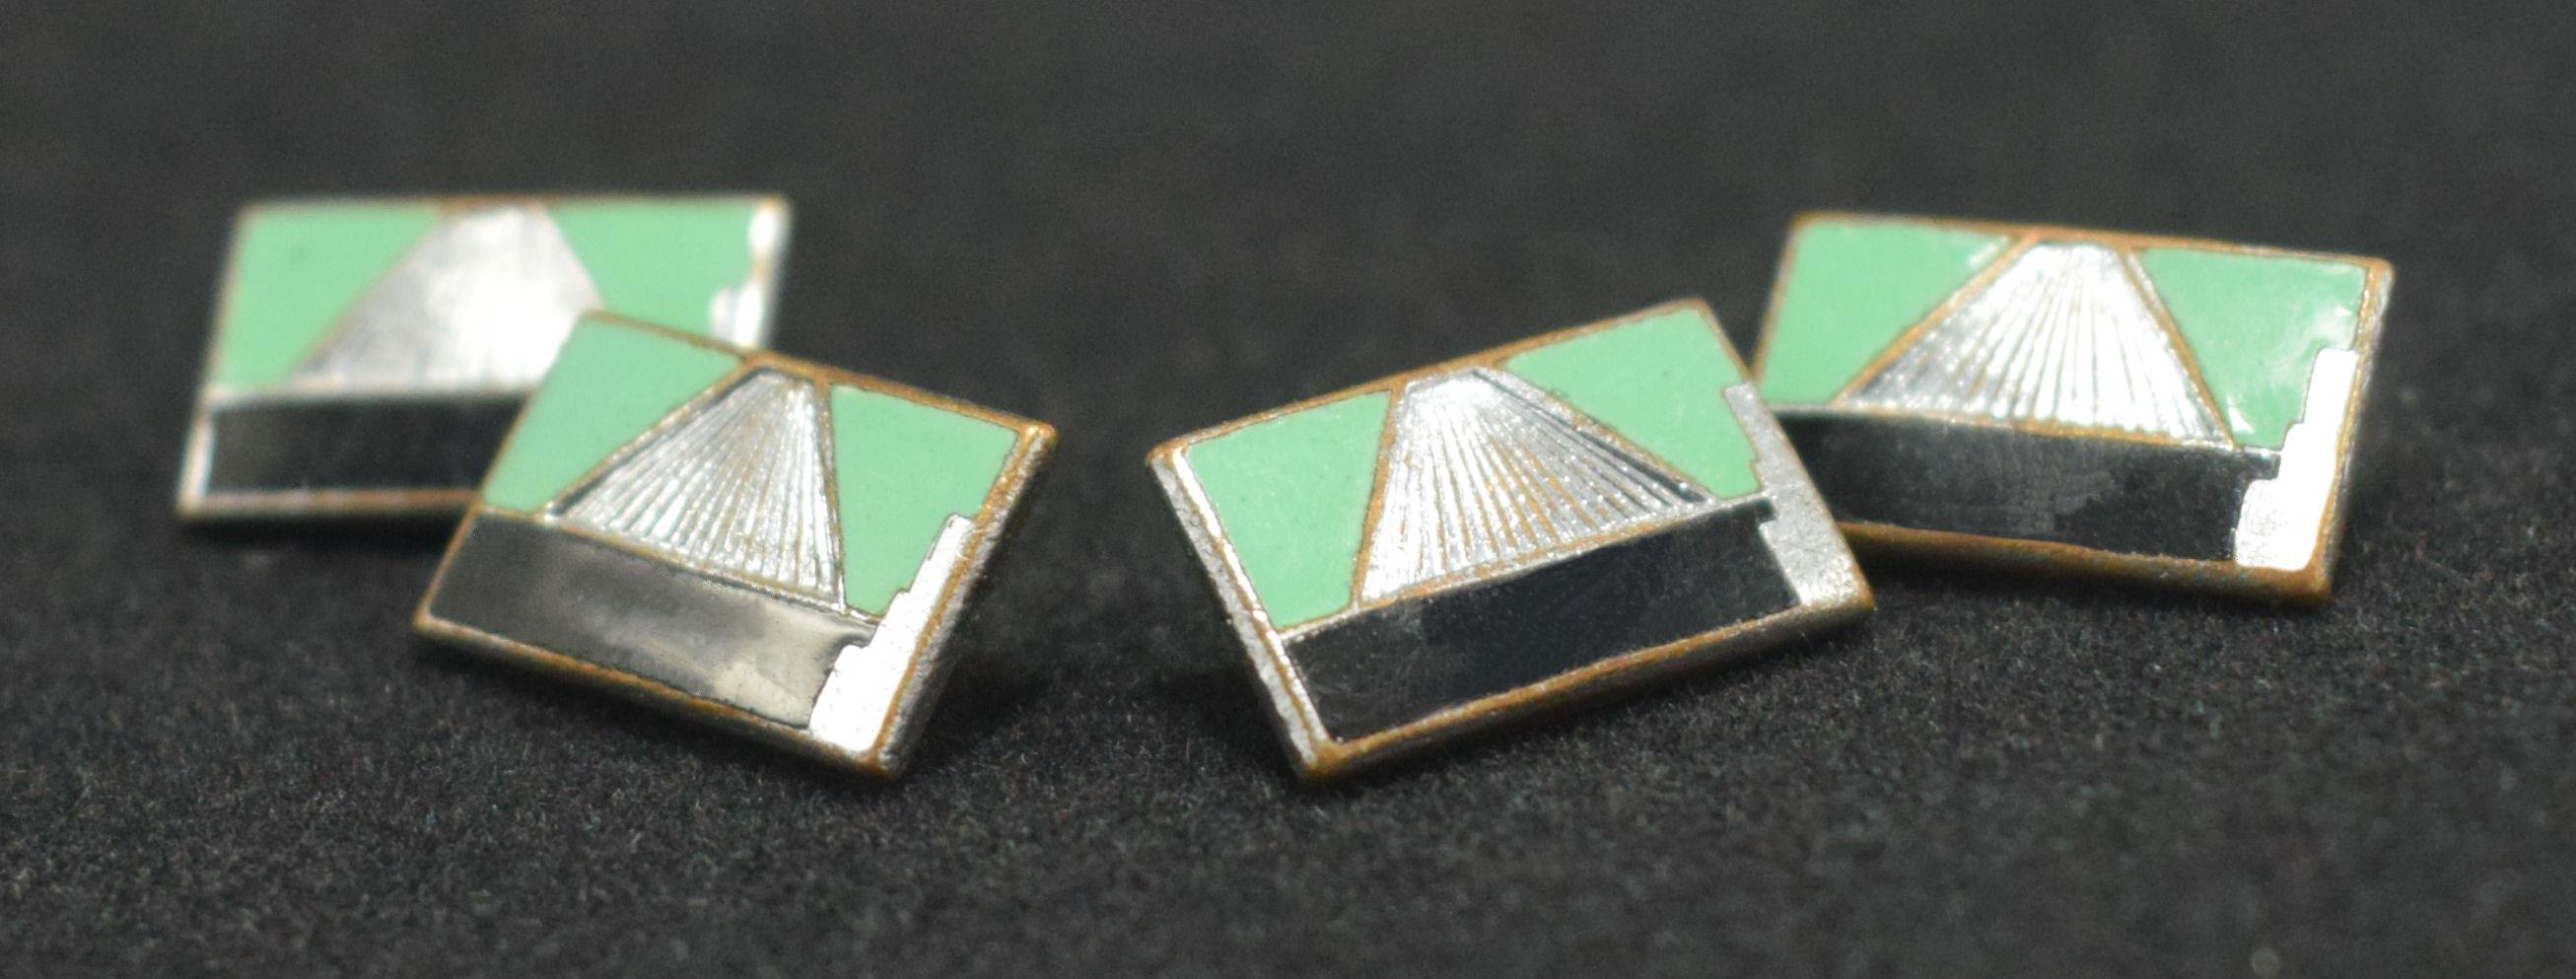 Art Deco Modernist Matching Pair of Enamel Gents Cufflinks, c1930 In Good Condition For Sale In Westward ho, GB